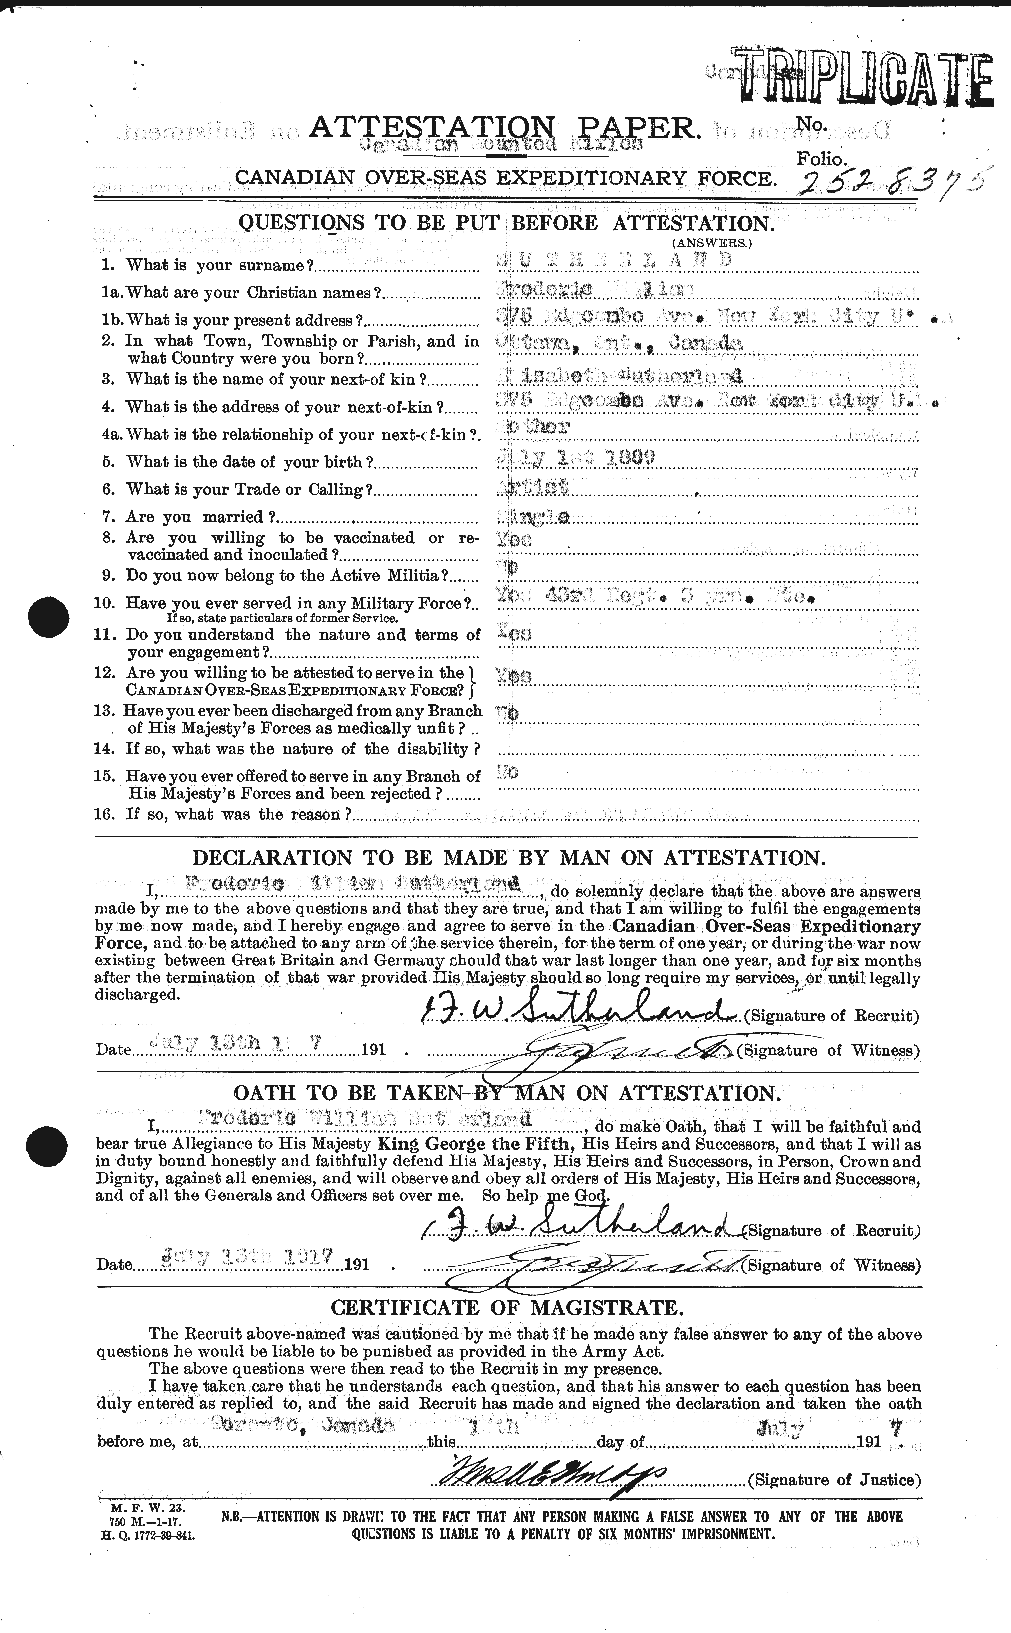 Personnel Records of the First World War - CEF 124869a